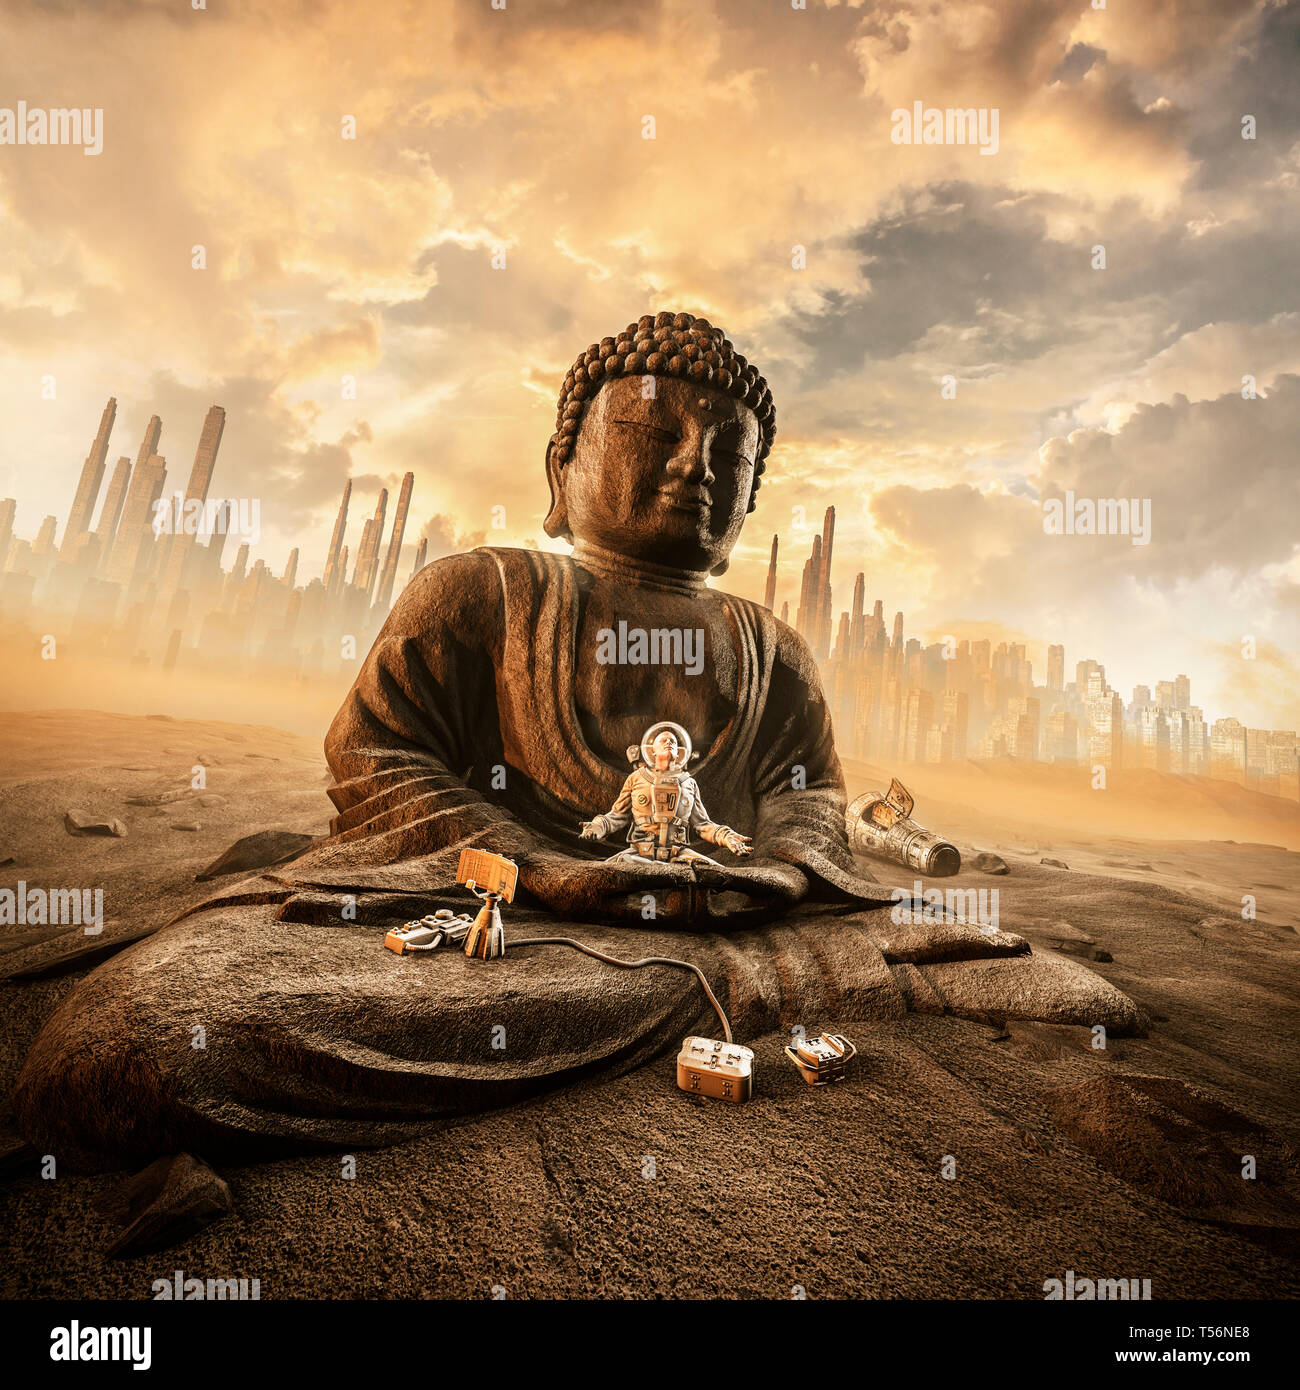 Harmony in the heat / 3D illustration of astronaut meditating on ancient stone statue of Buddha on abandoned desert city colony planet under a gloriou Stock Photo